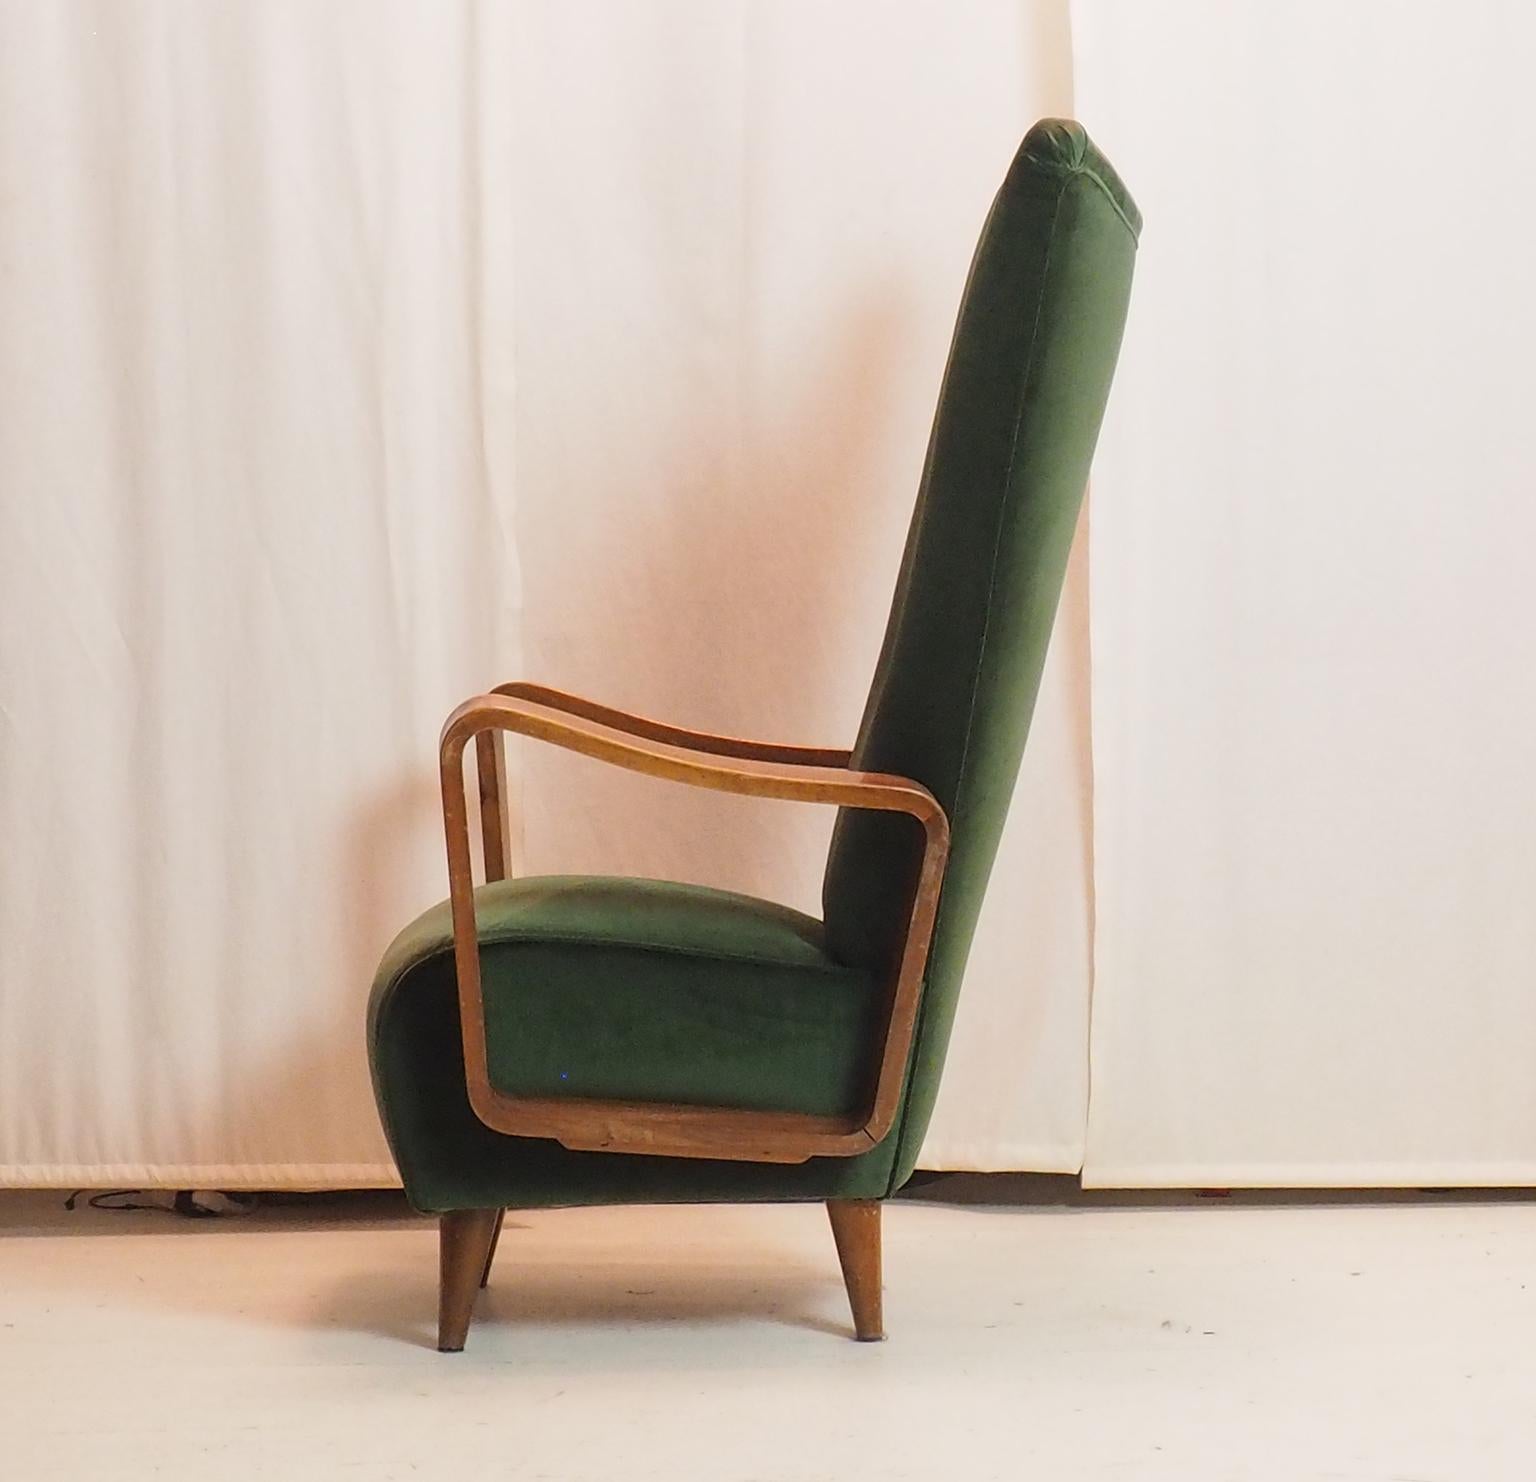 Midcentury High Back Italian Green Armchairs by Pietro Lingeri, Italy, 1950s For Sale 3